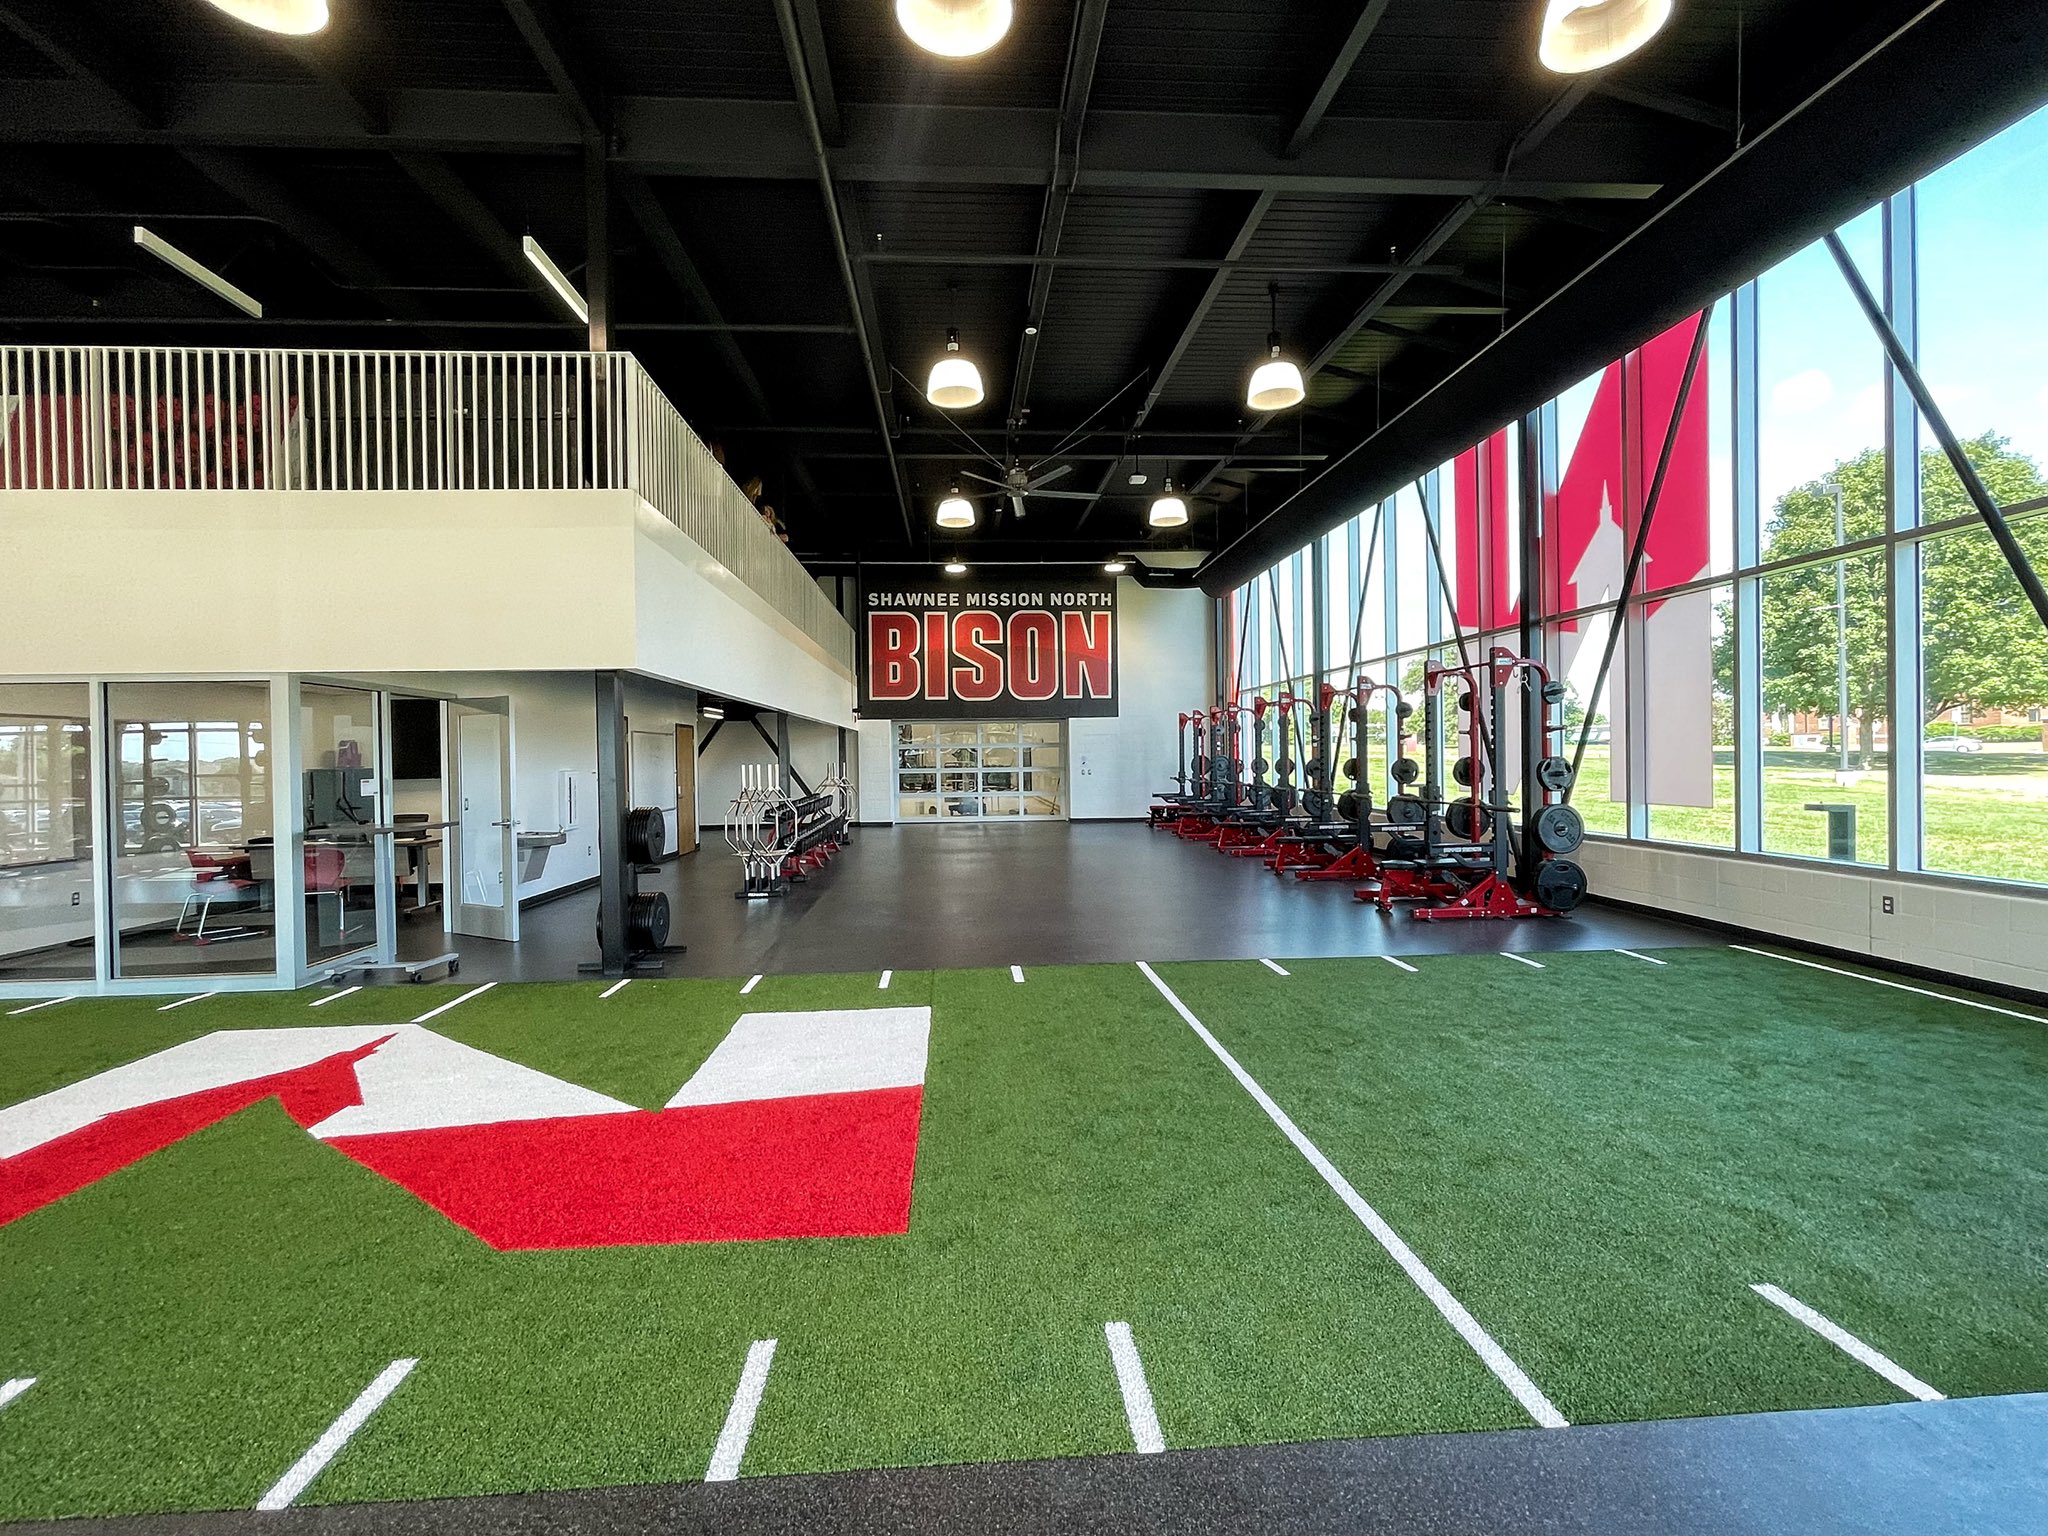 PHOTOS: Check out Shawnee Mission North's new workout facility